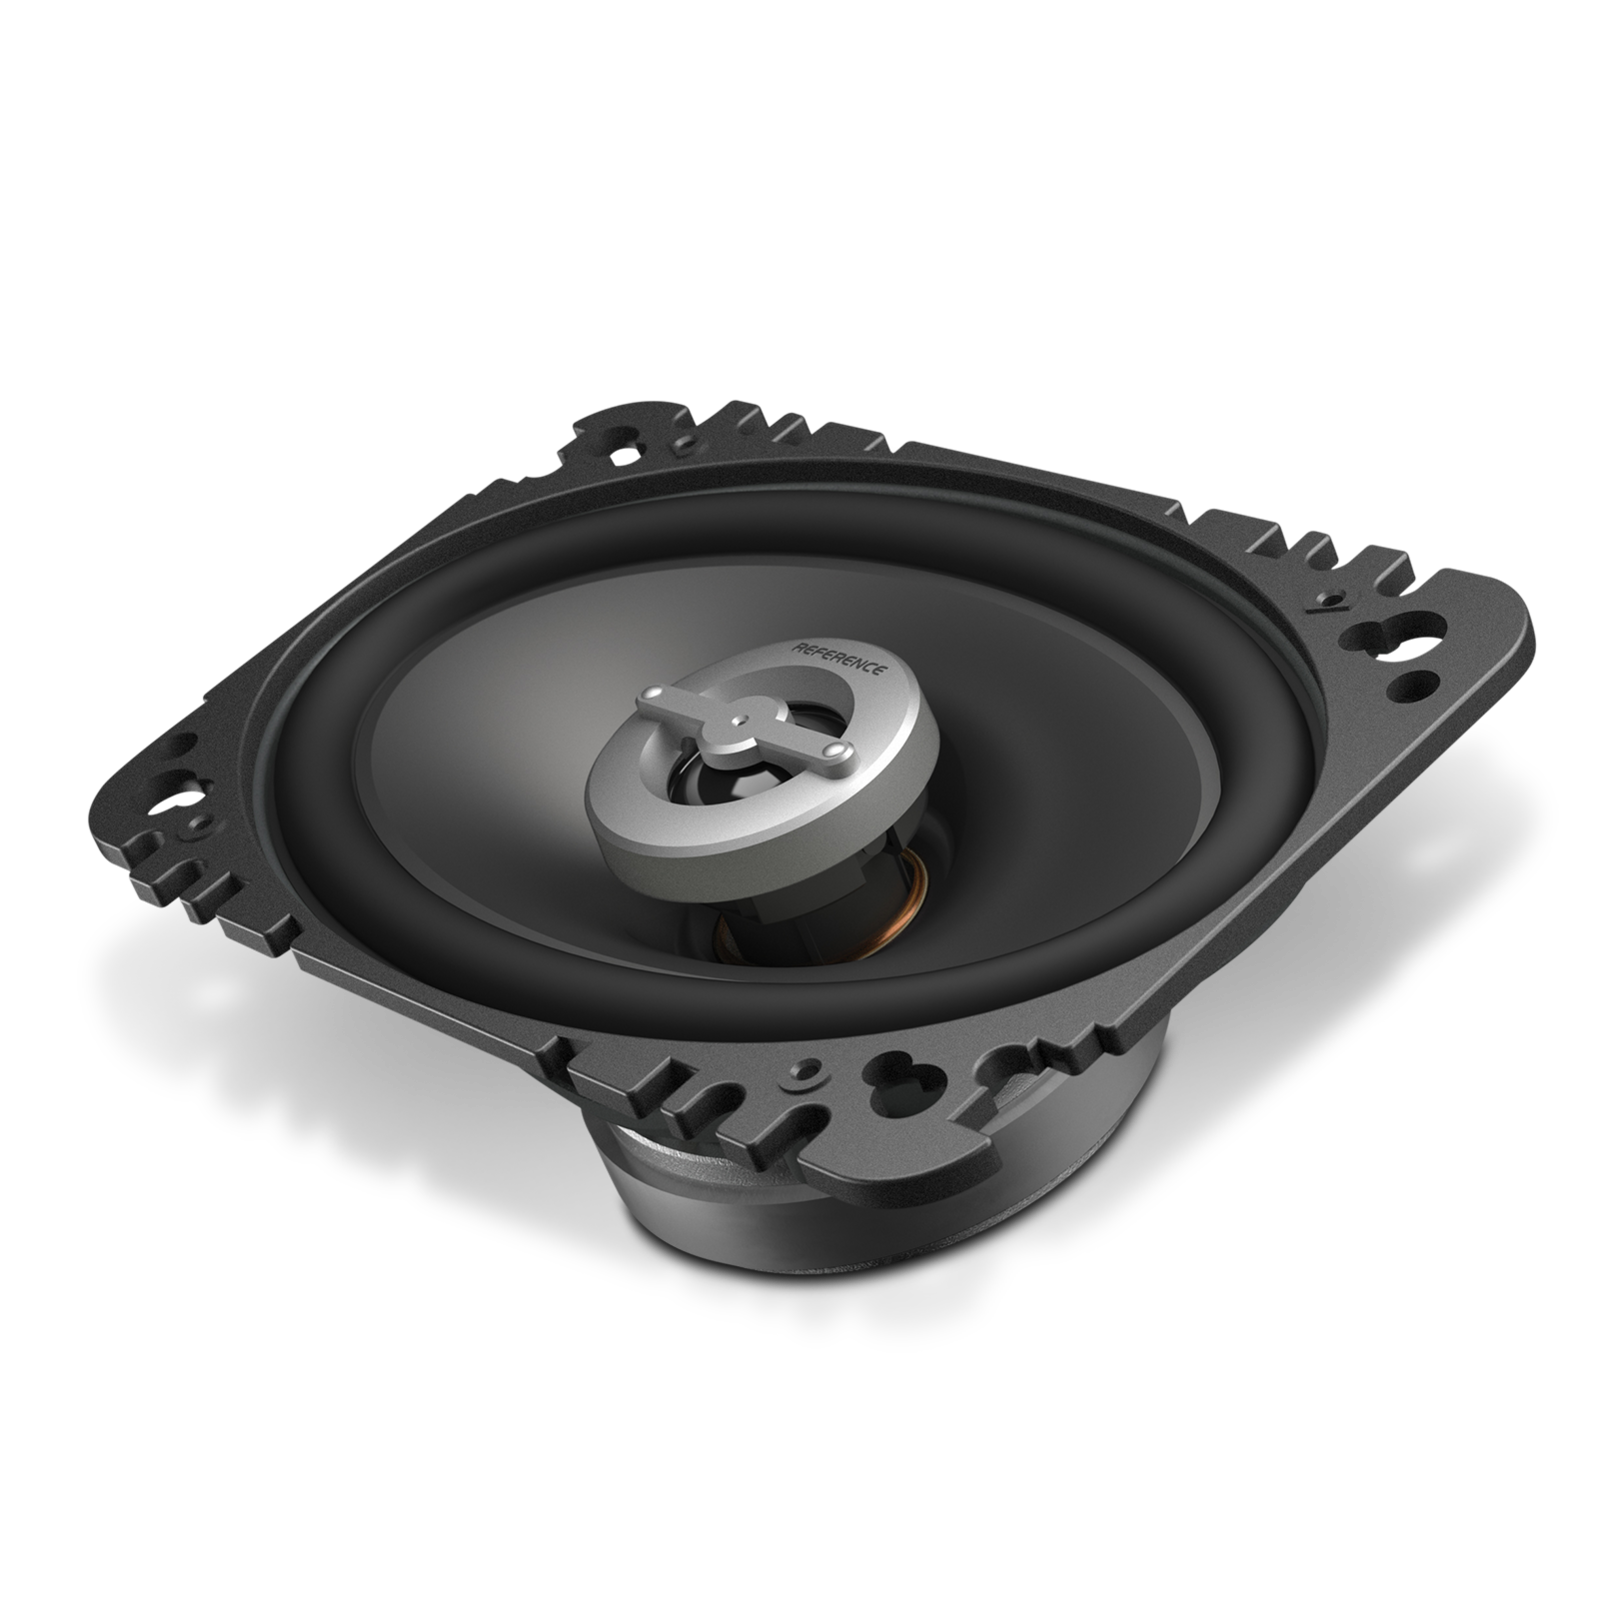 Reference 6402cfx - Black - A 4" x 6", custom-fit, two-way, high-fidelity coaxial speaker with true 4-ohm technology - Hero